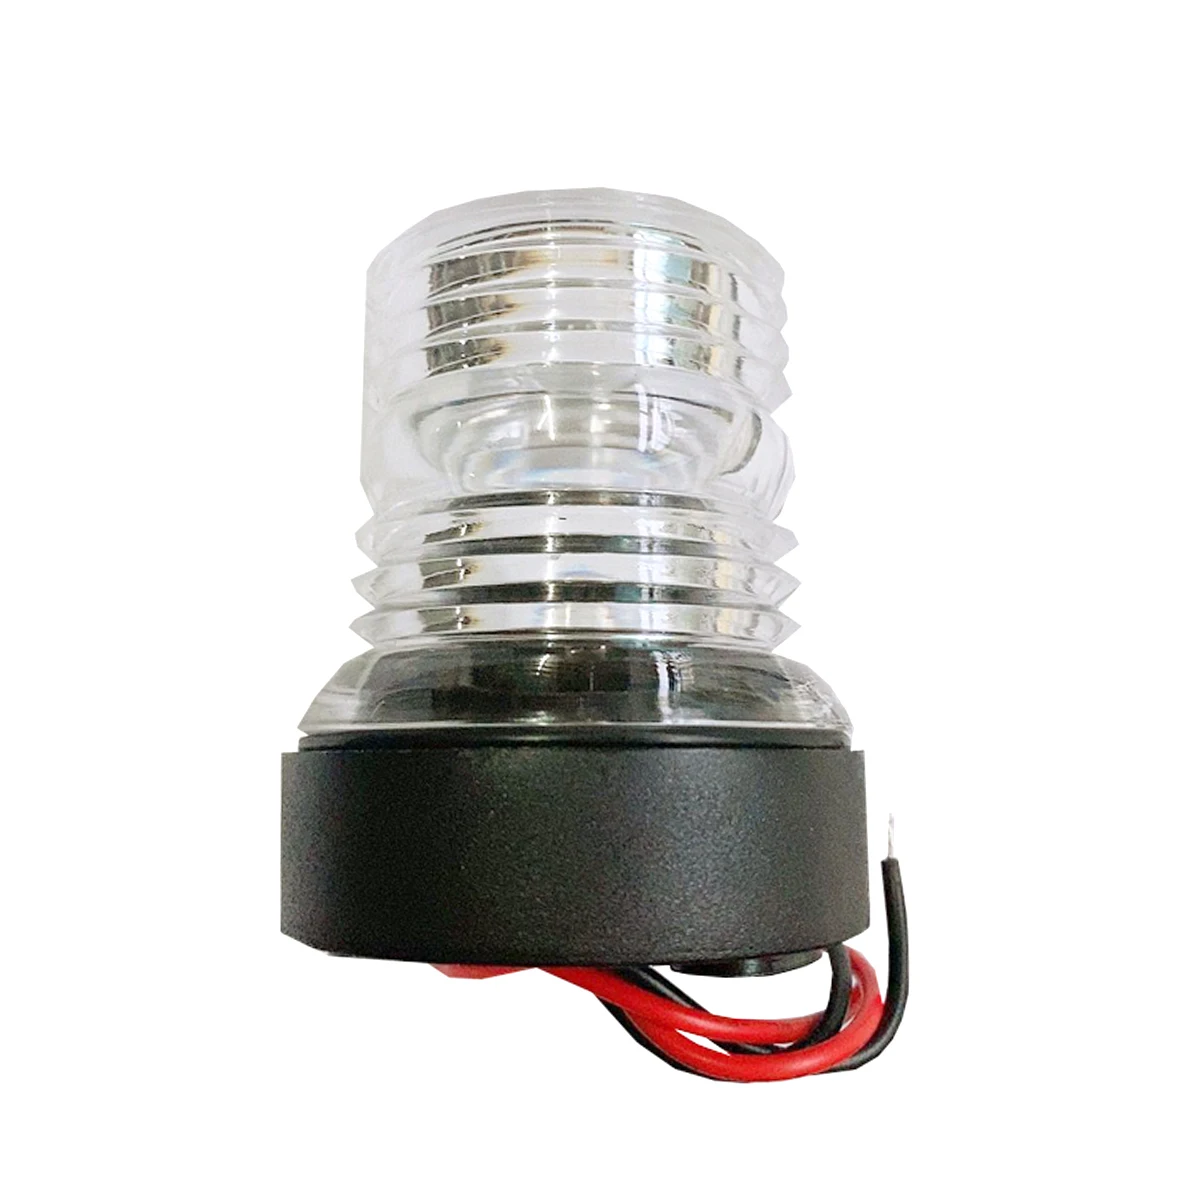 360 Degree 12V LED/Tungsten filament Lamp Navigation Light All-round Light Boat Singnal Lamp for Pontoon Power and Skiff